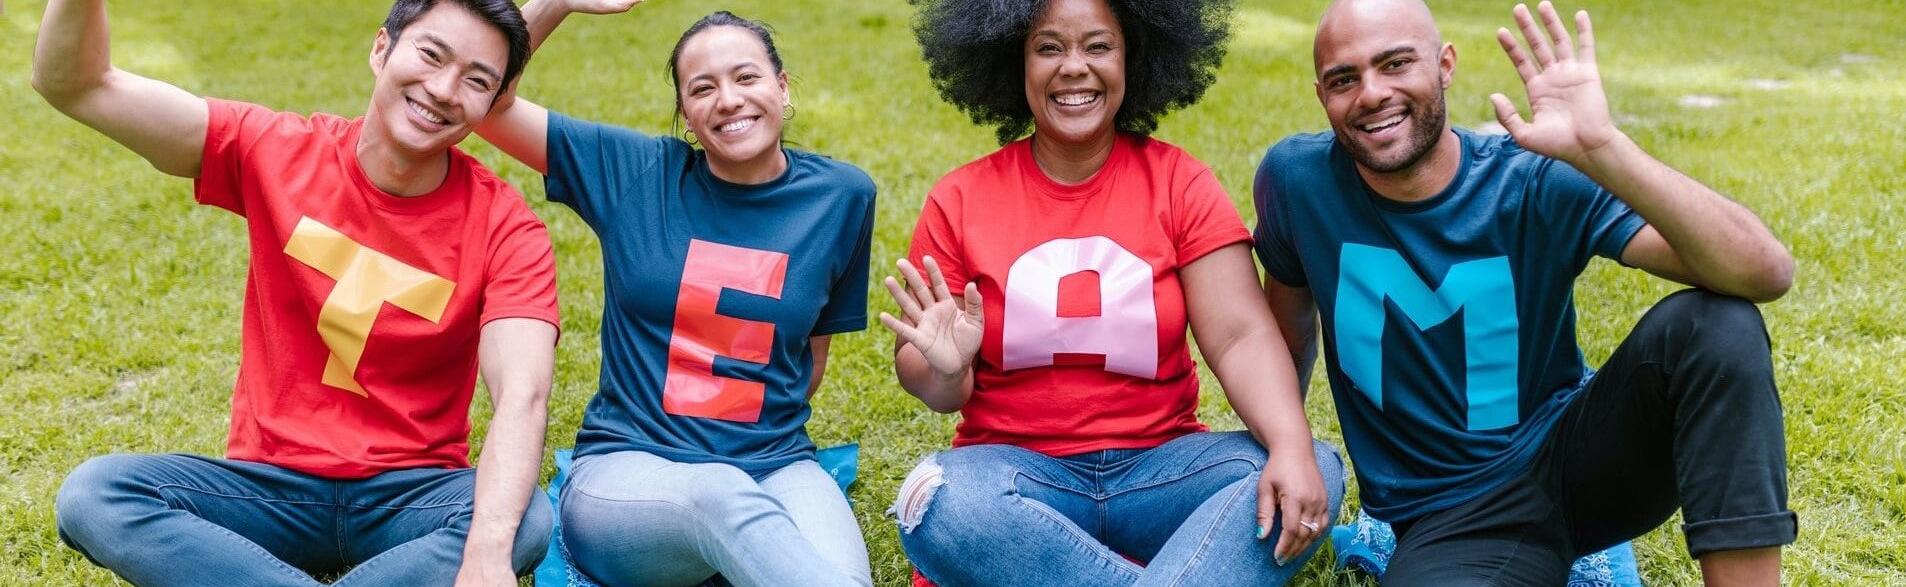 Two Men and two women sitting on the grass outdoors smiling and wearing T-shirts that spell out team